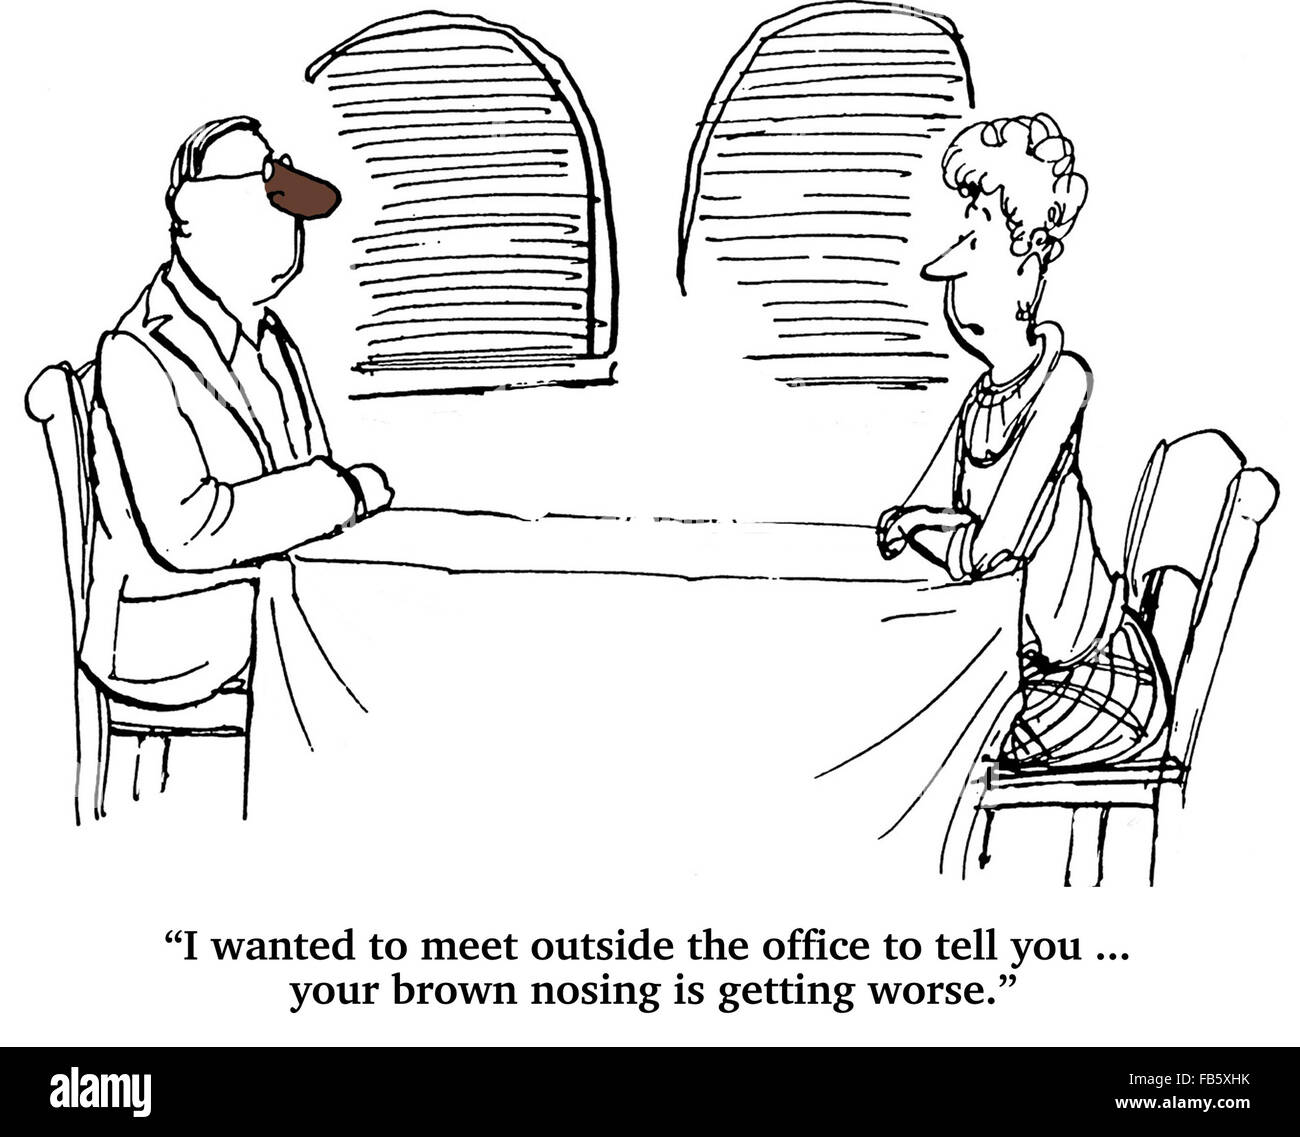 Business cartoon about difficult coworker.  The businesswoman told her coworker his brown nosing was getting worse. Stock Photo